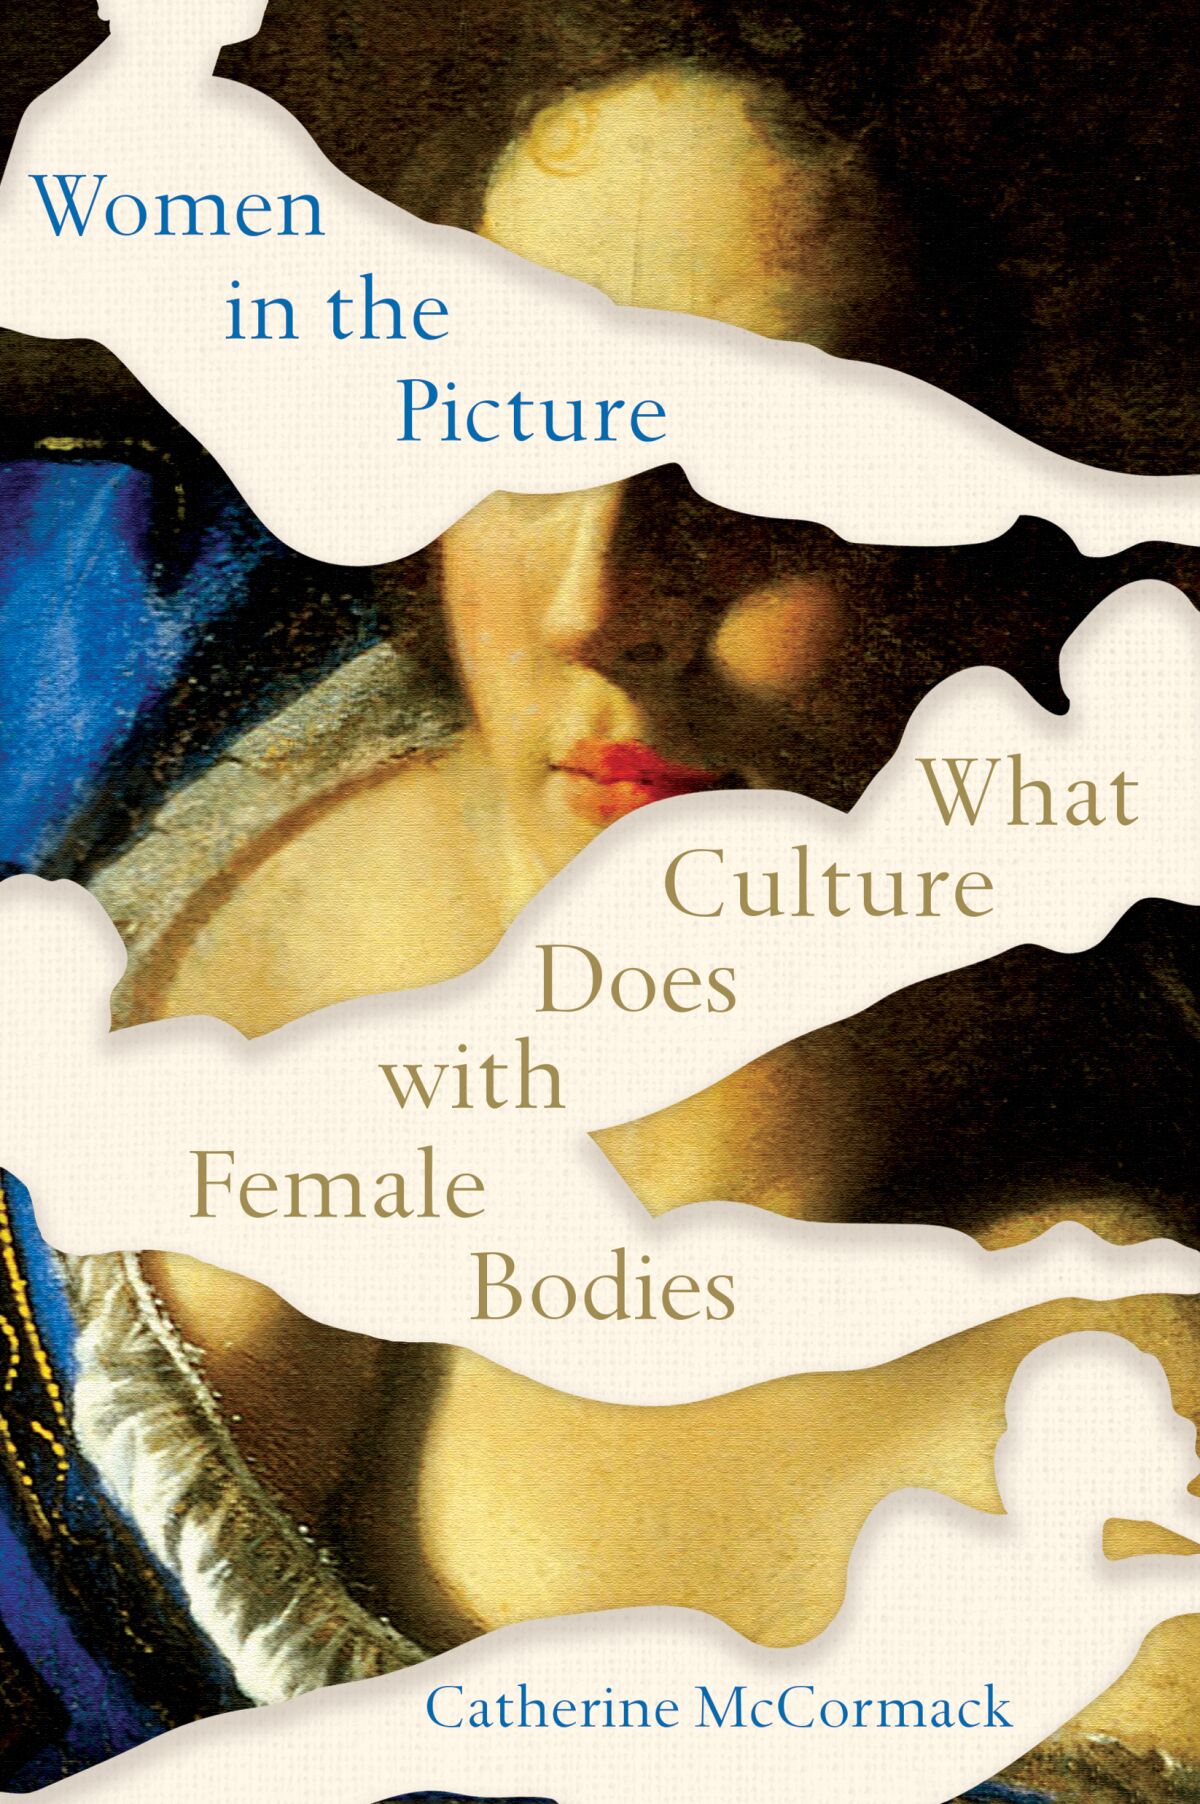 Book cover of Catherine McCormack's "Women in the Picture"